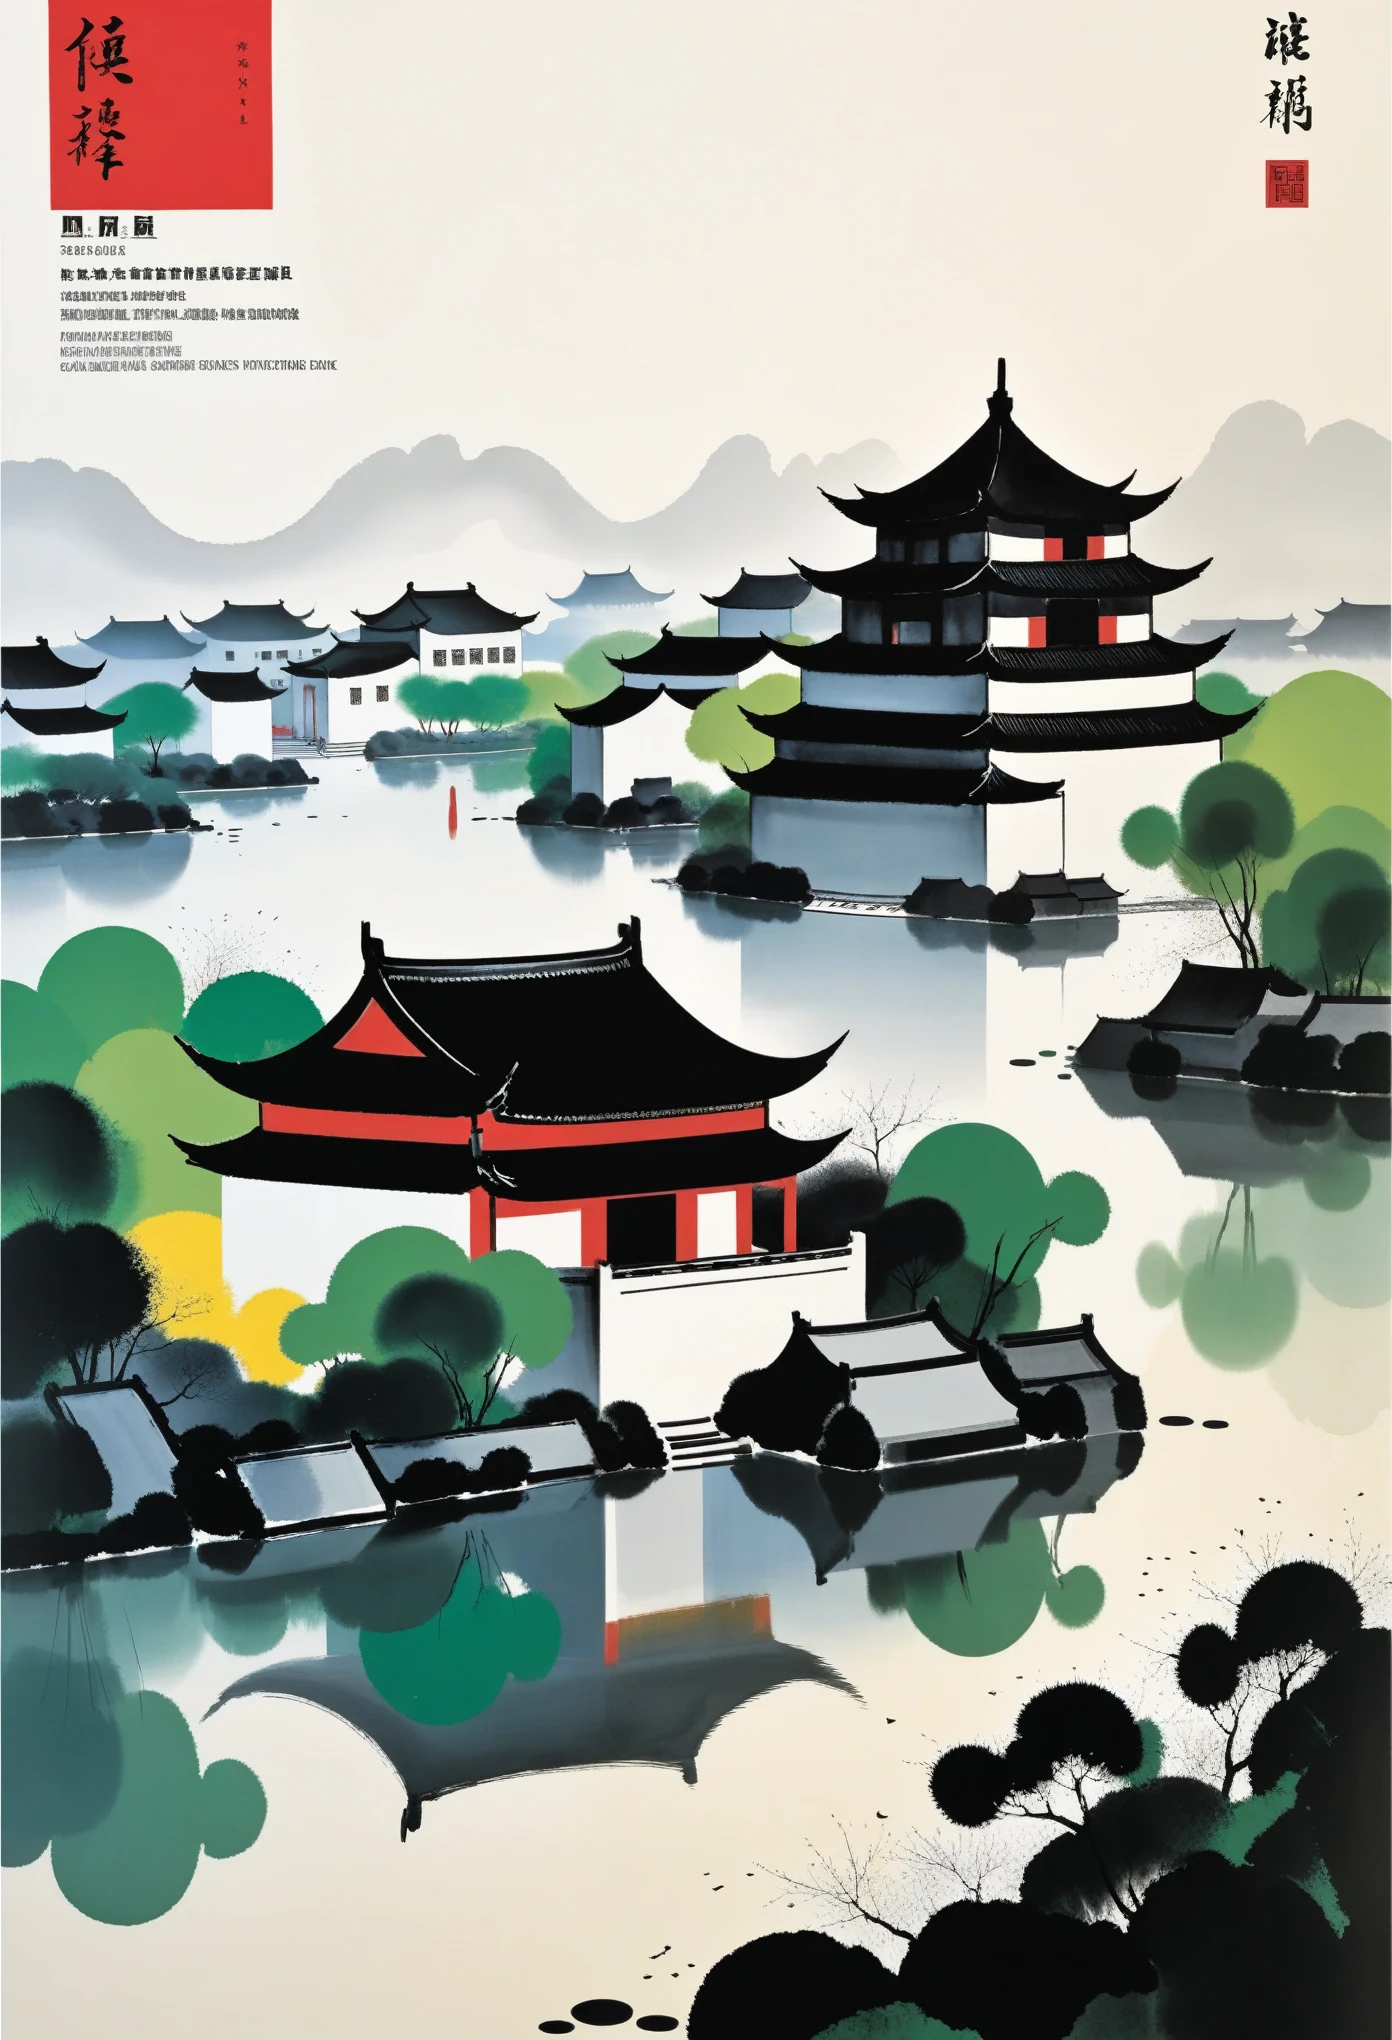 magazine cover，printing：Geometric abstract ink，Describe the Jiangnan landscape architectural complex，Wu Guanzhong's style is an artistic expression that merges traditional Chinese ink techniques with Western painting concepts. It is characterized by modern interpretations of traditional themes, creating unique visual effects through color and line.